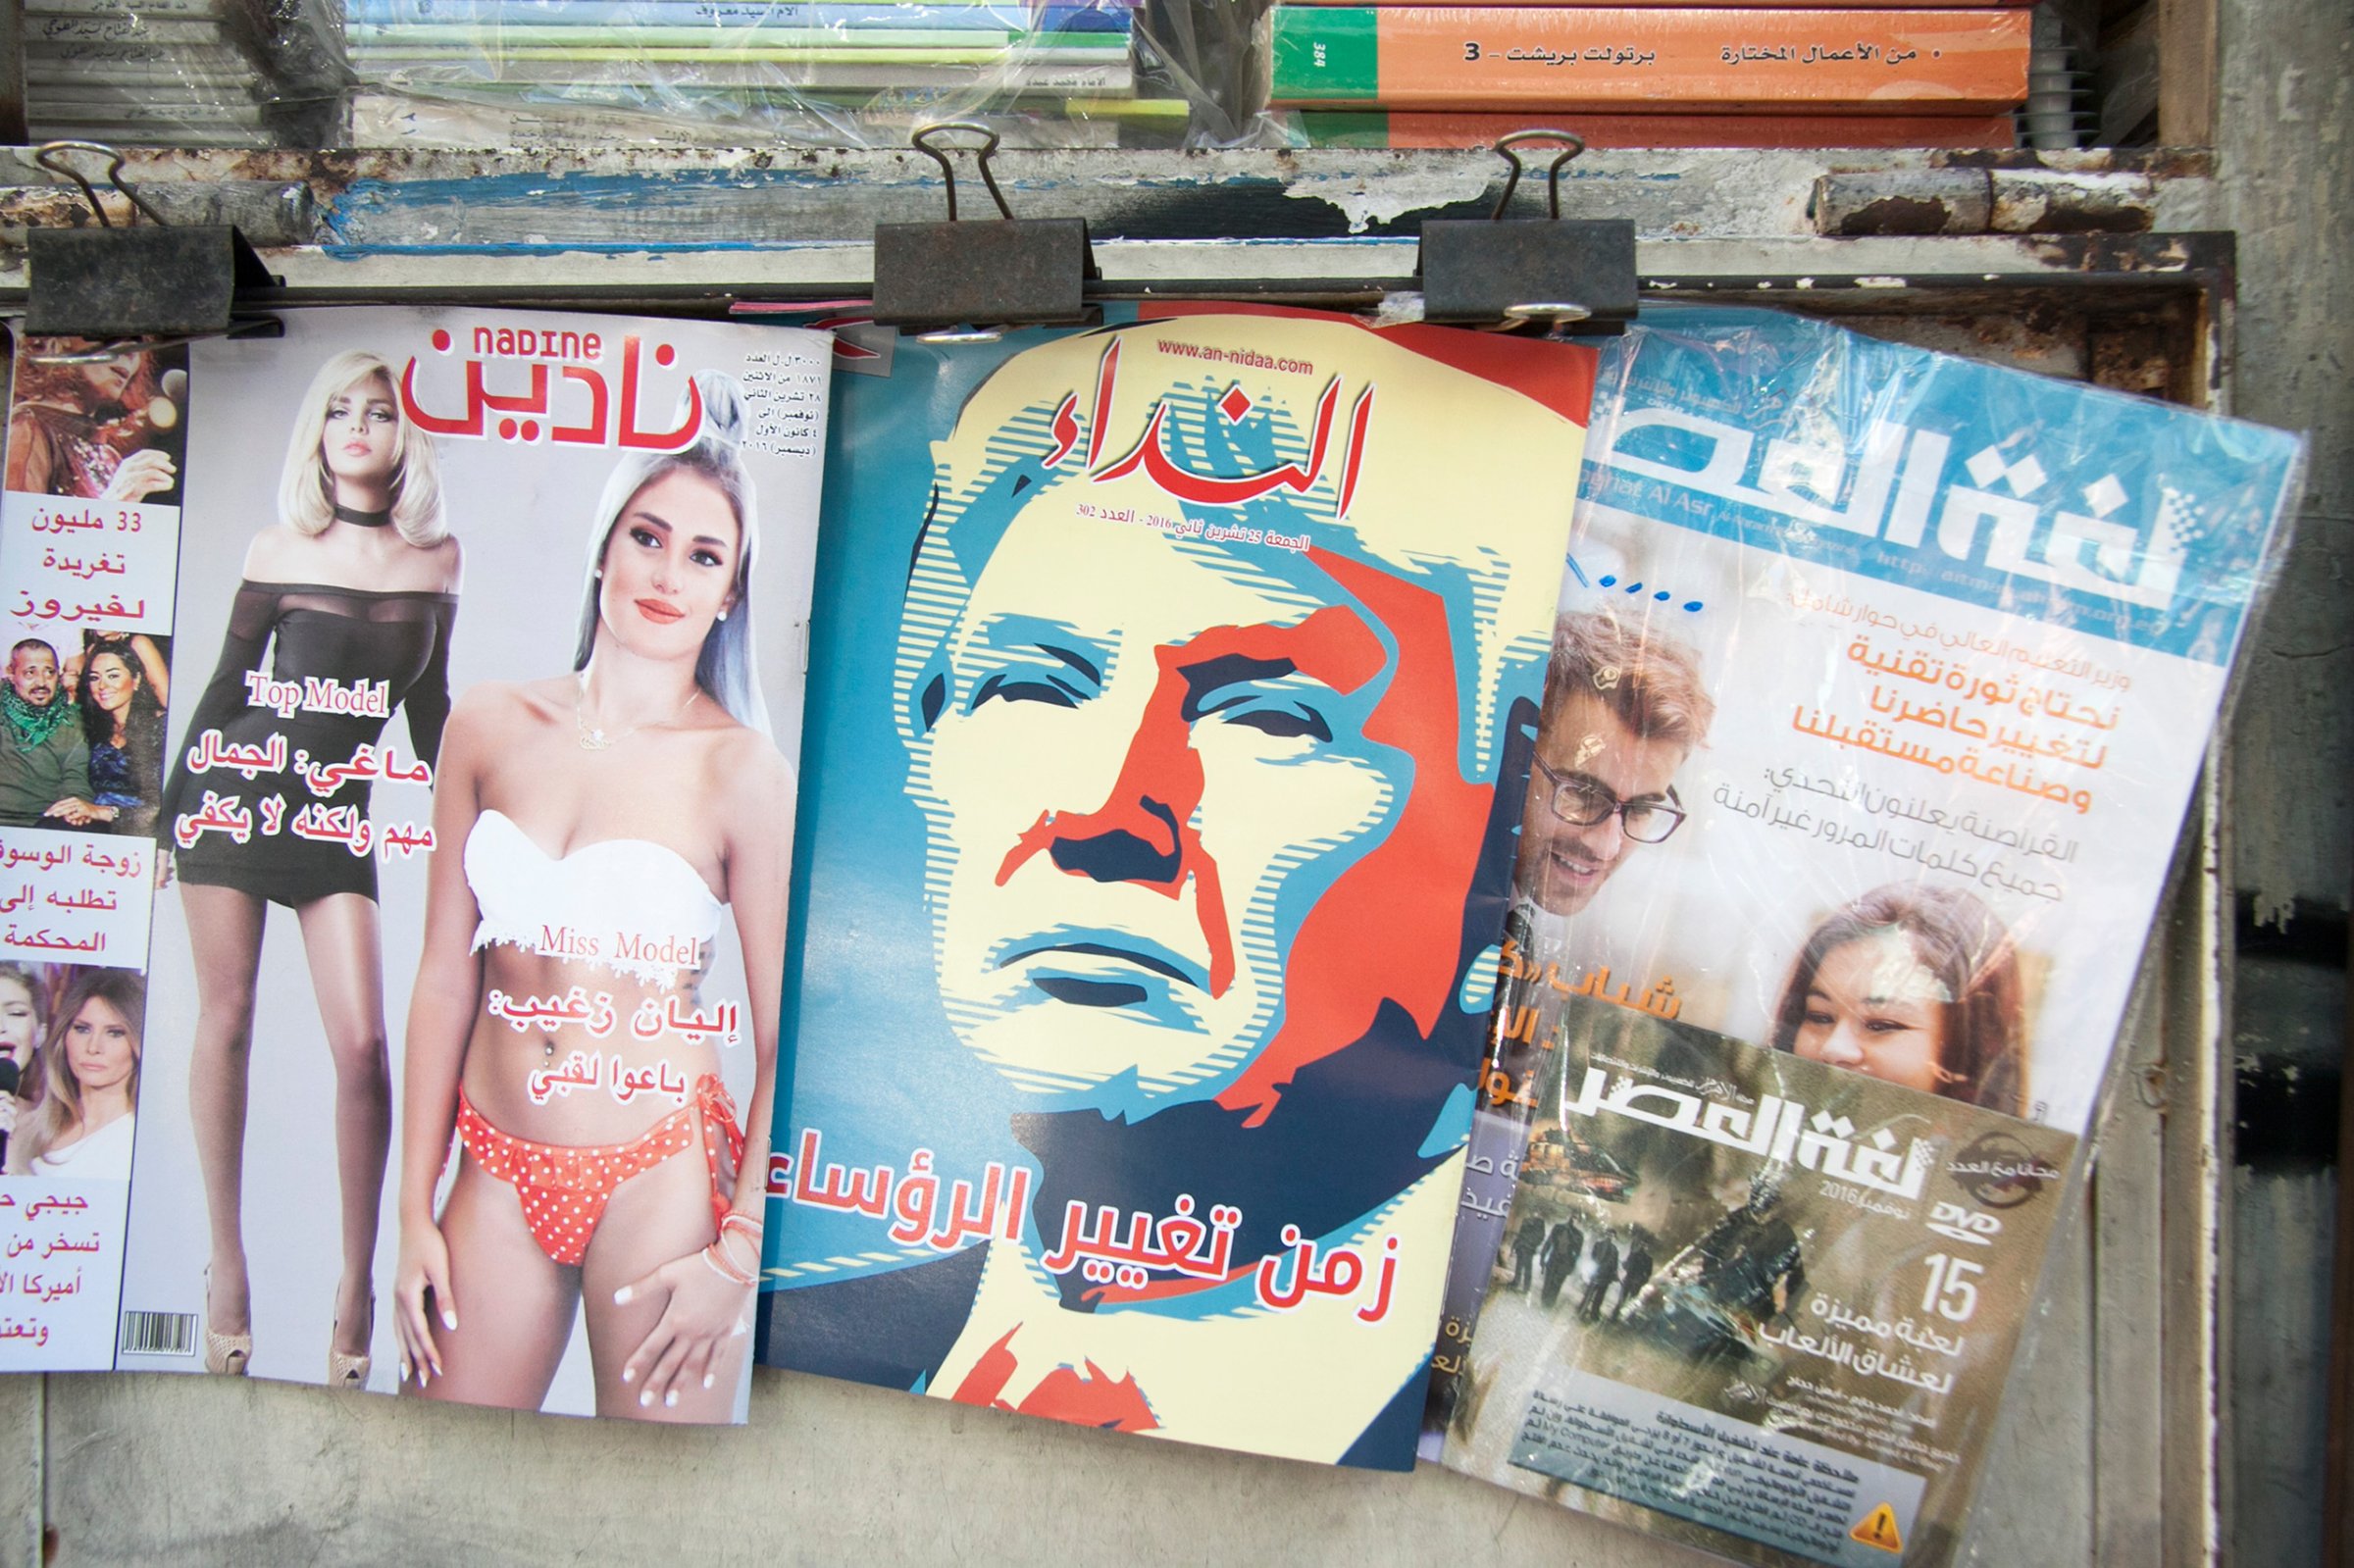 President-elect Donald Trump is featured on the front cover of an Arabic-language magazine cover at a newsstand in Beirut on Nov. 25, 2016.